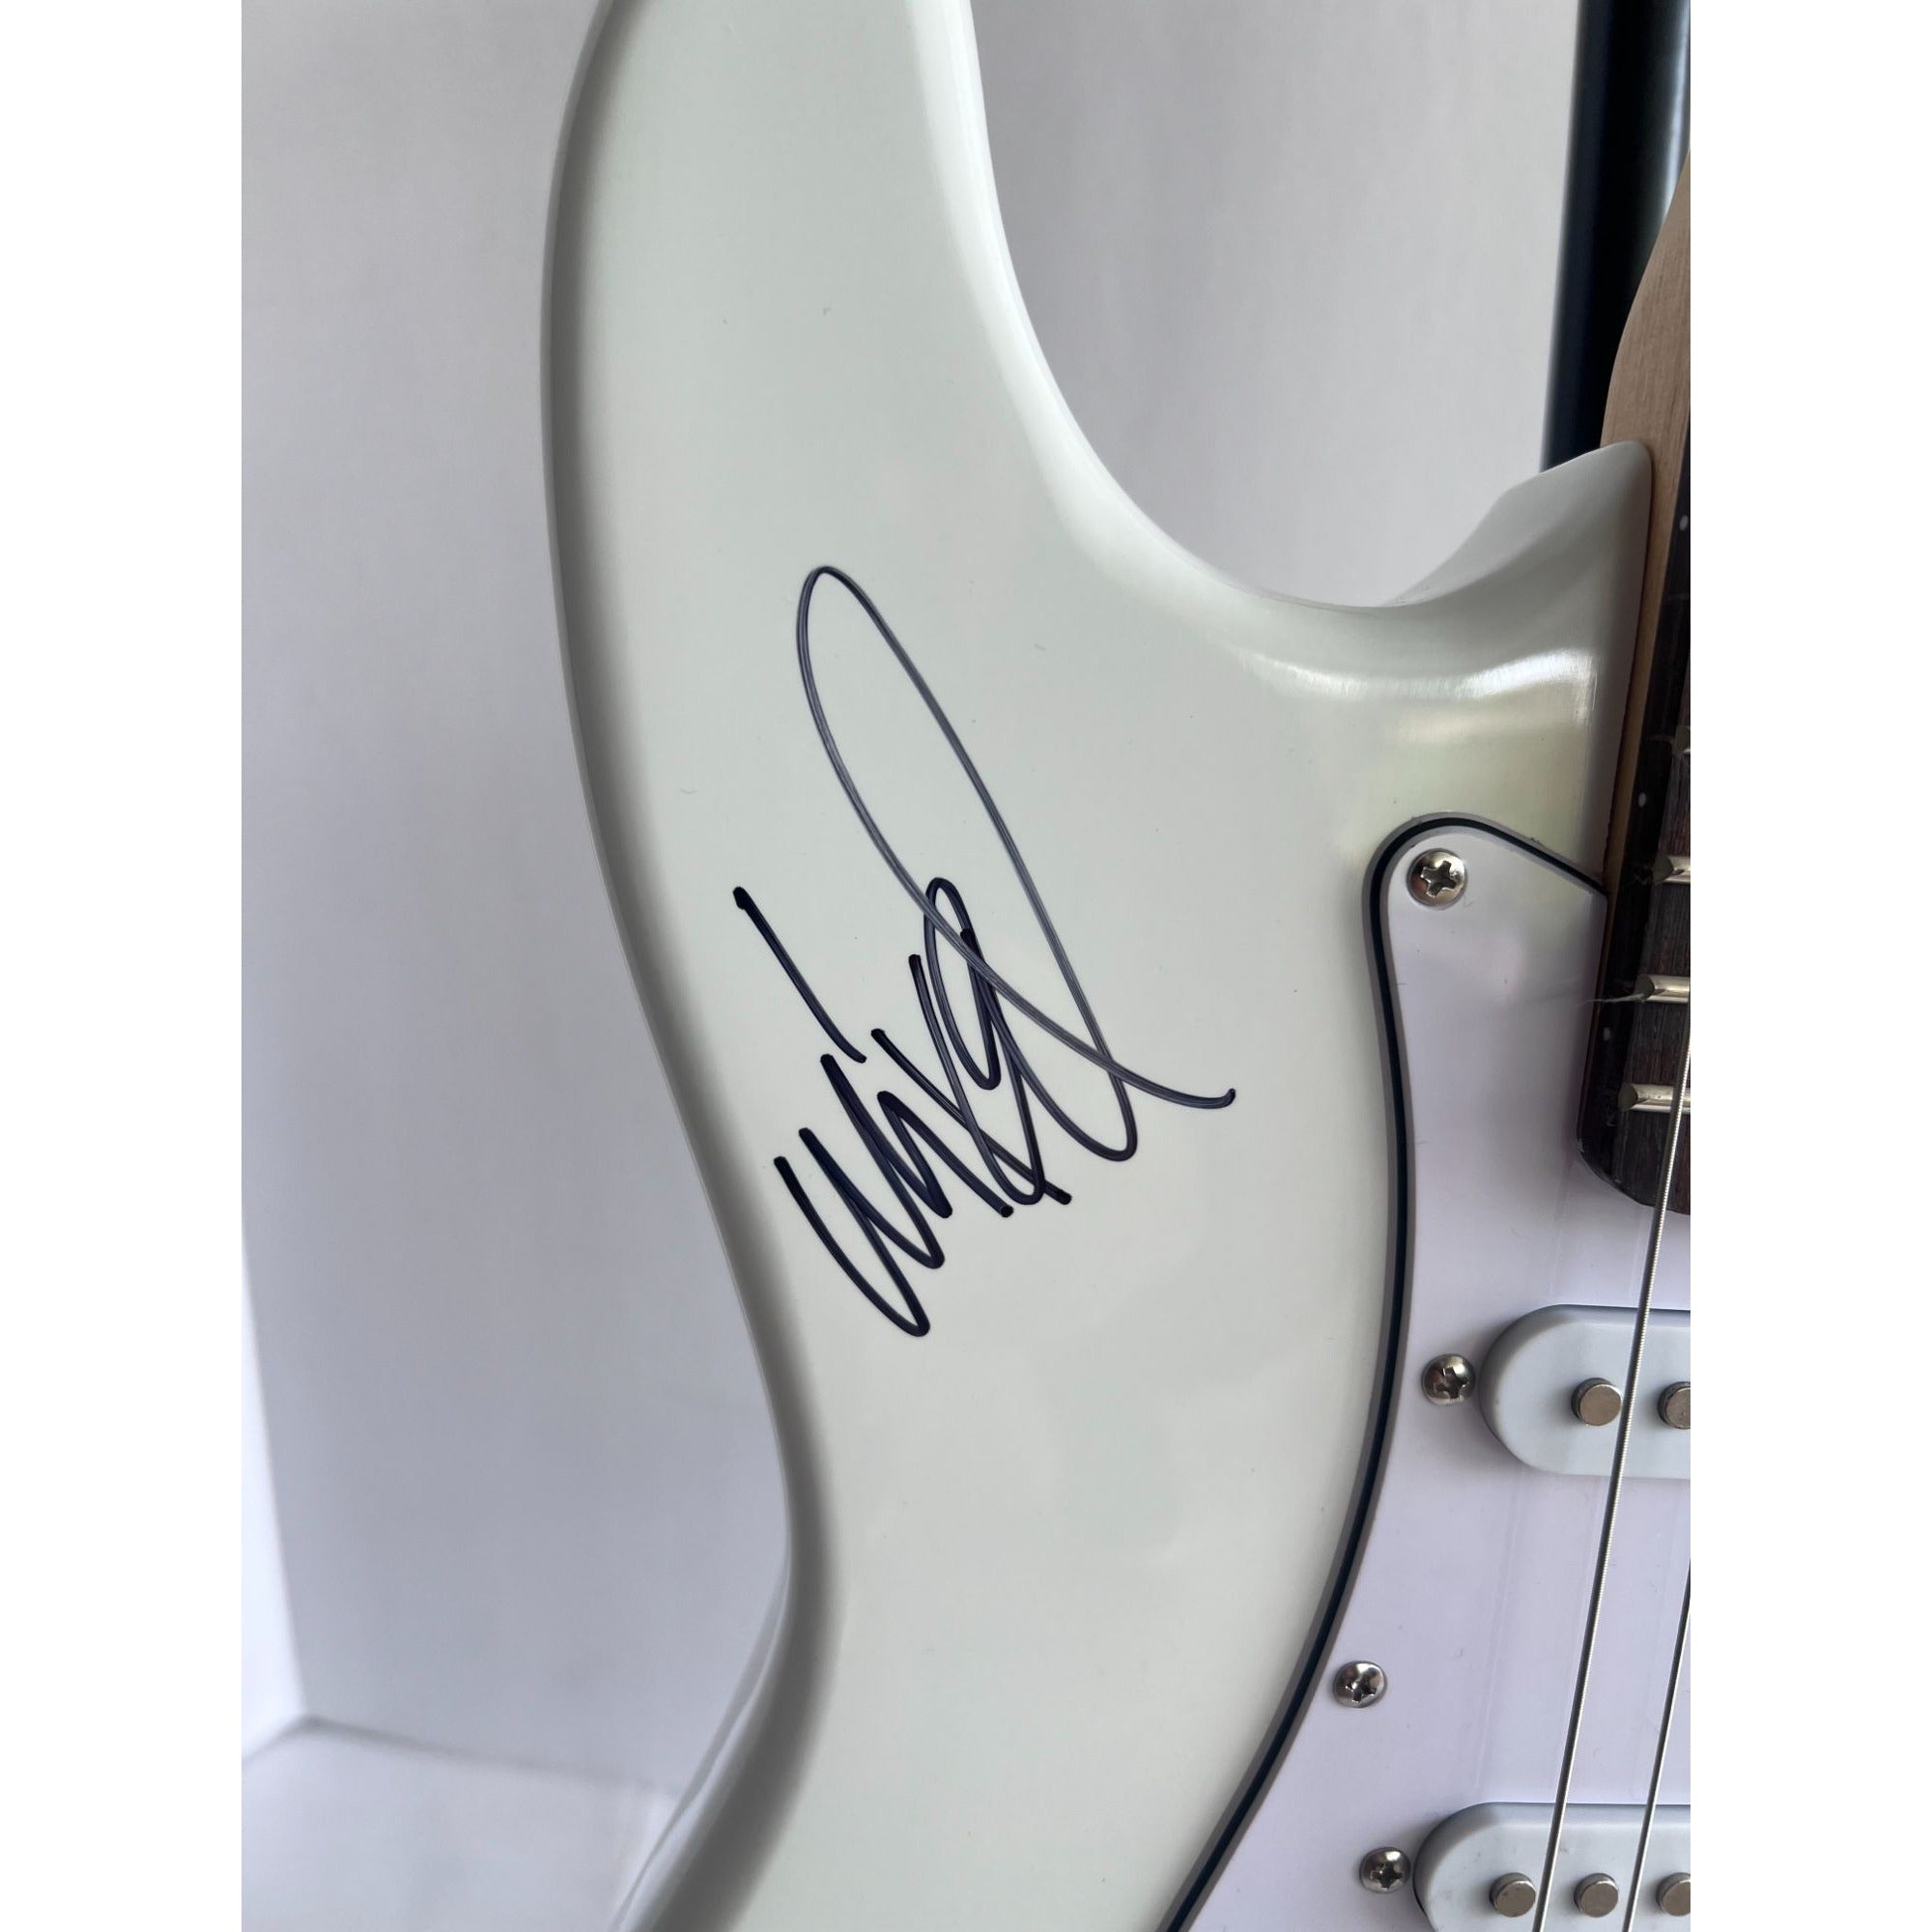 Chester Bennington Linkin Park full size Huntington Stratocaster electric guitar signed with proof